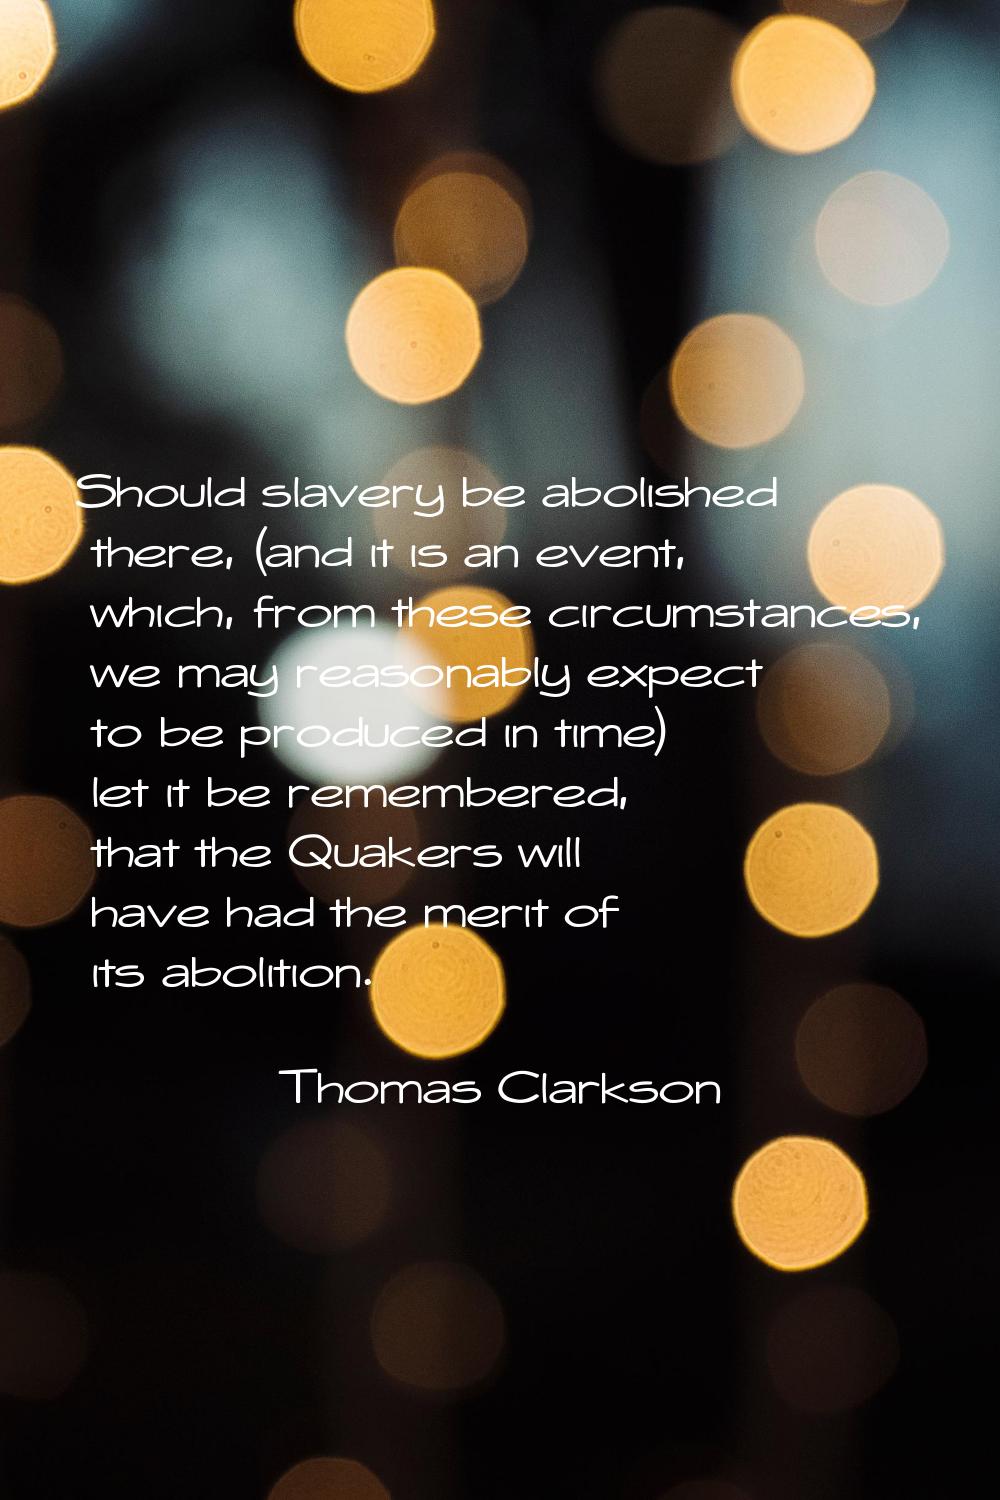 Should slavery be abolished there, (and it is an event, which, from these circumstances, we may rea